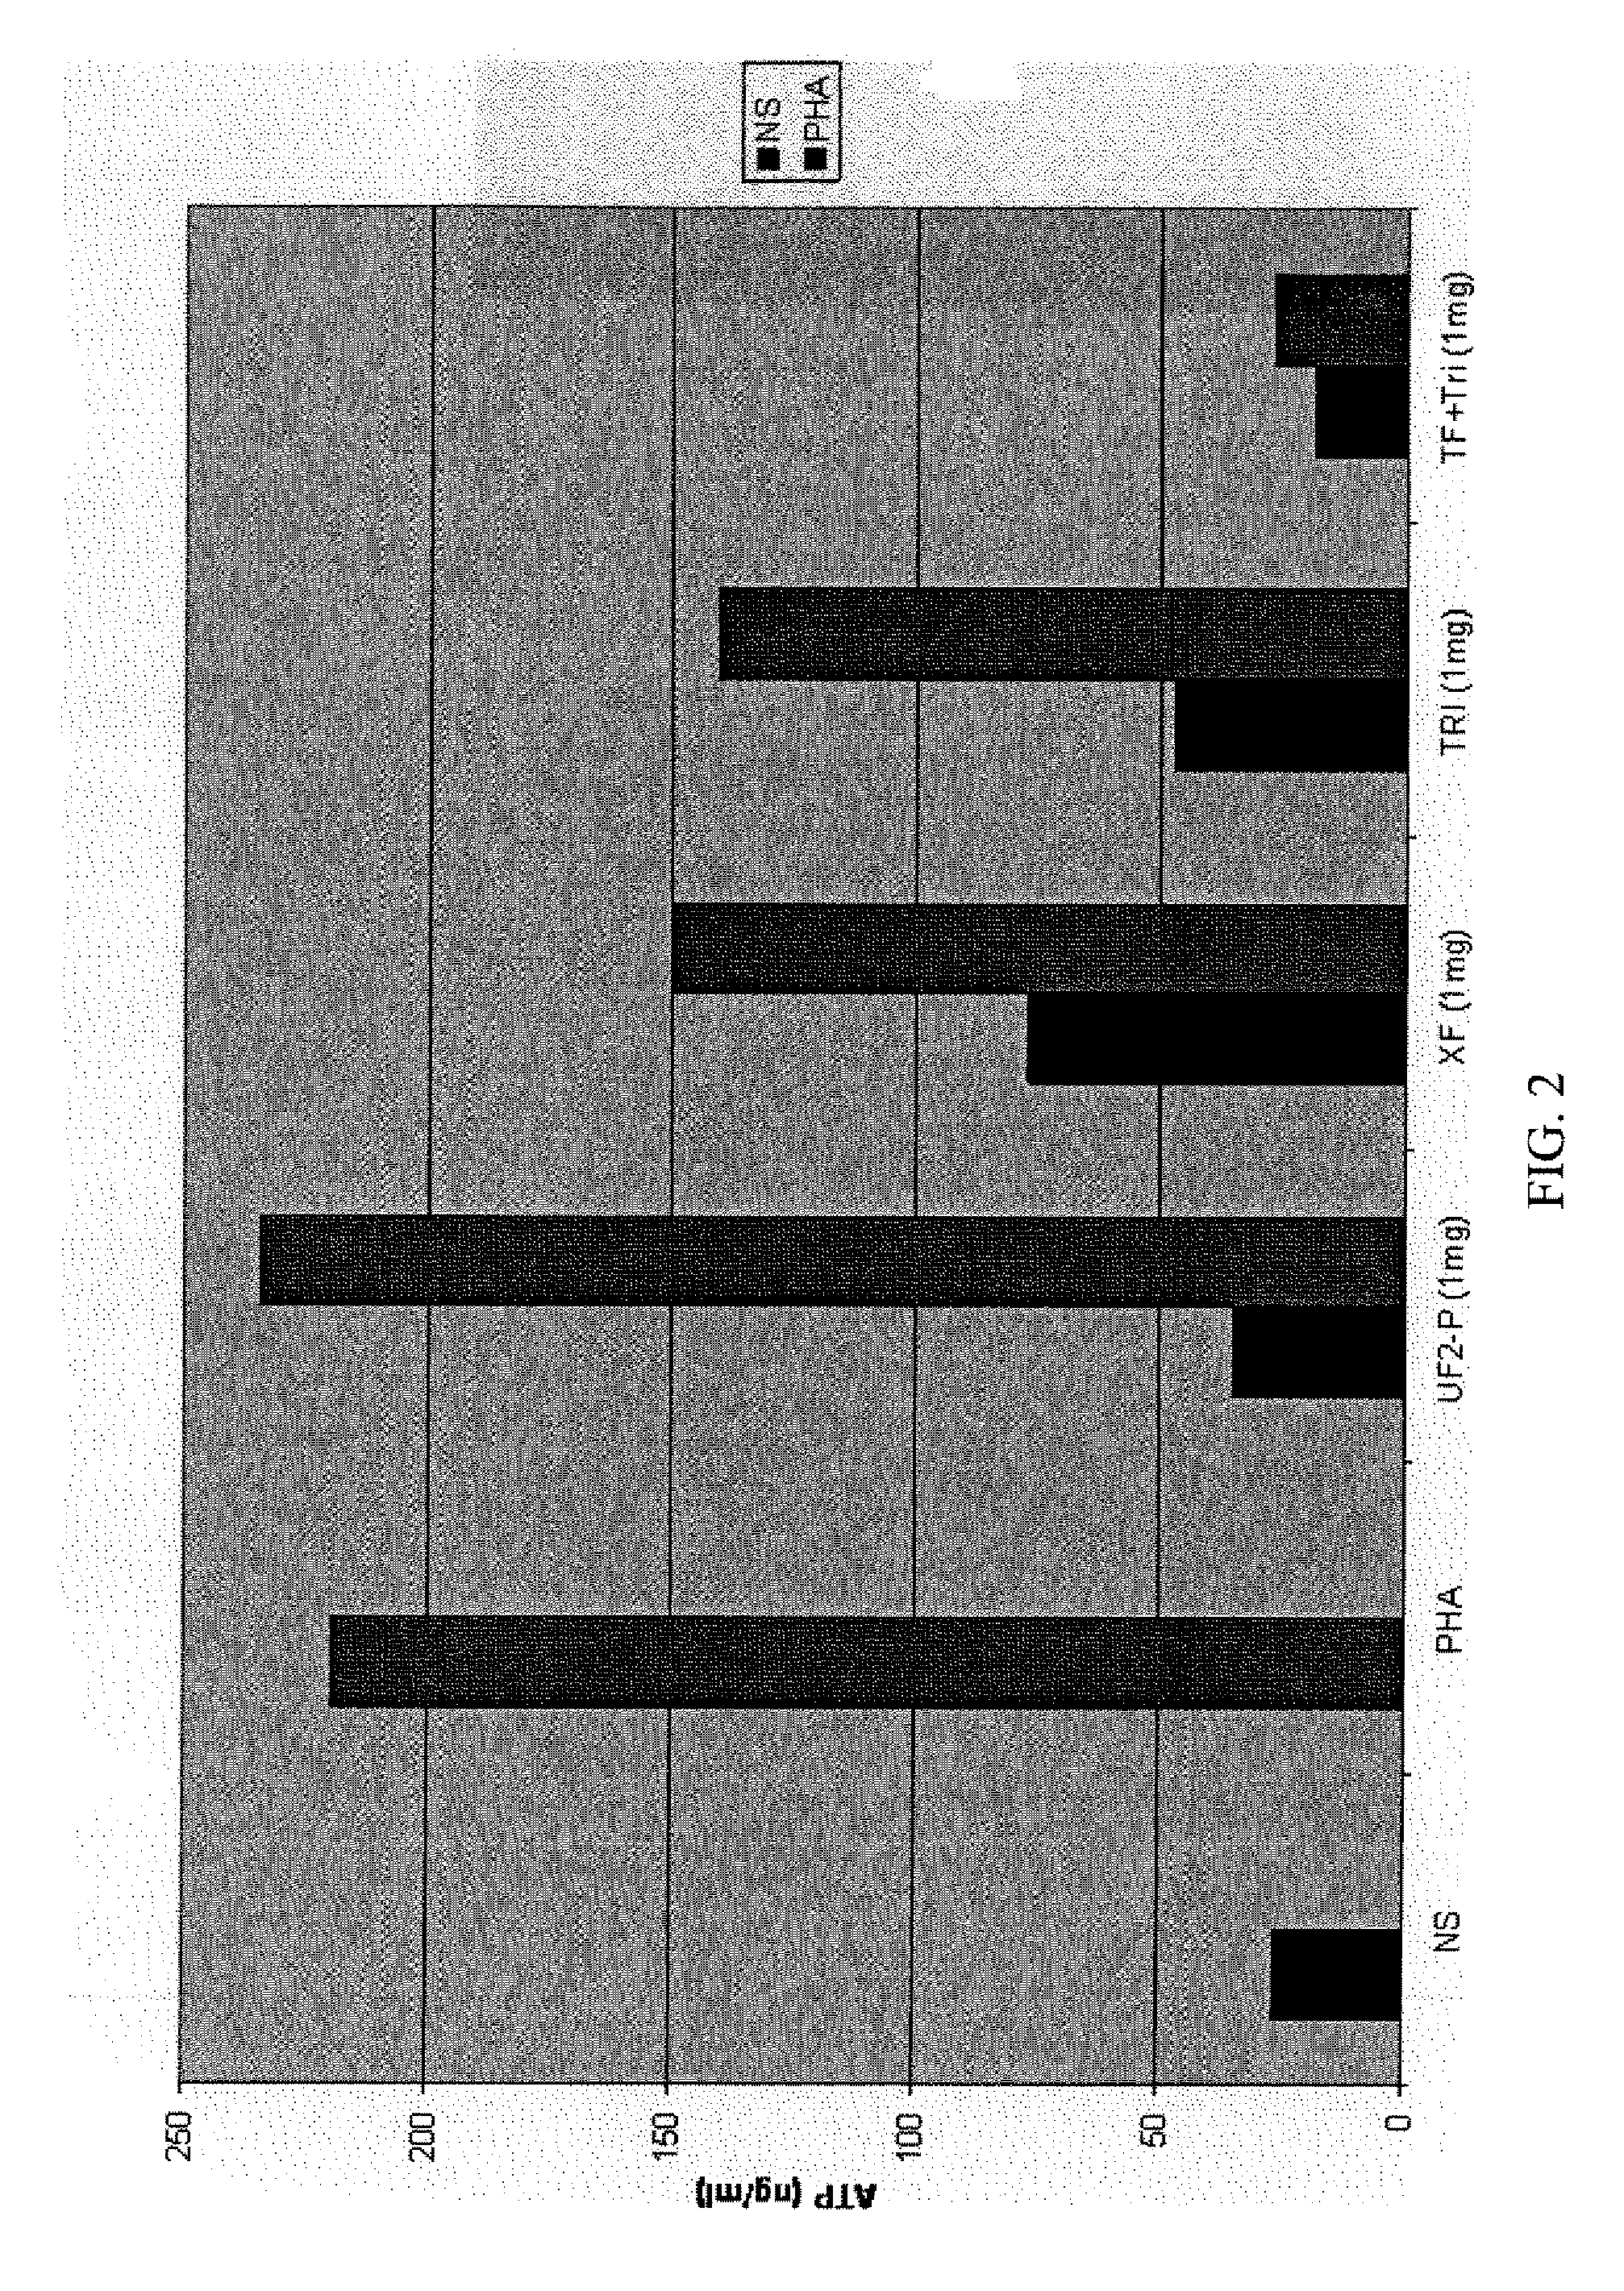 Nanofraction immune modulators, preparations and compositions including the same, and associated methods